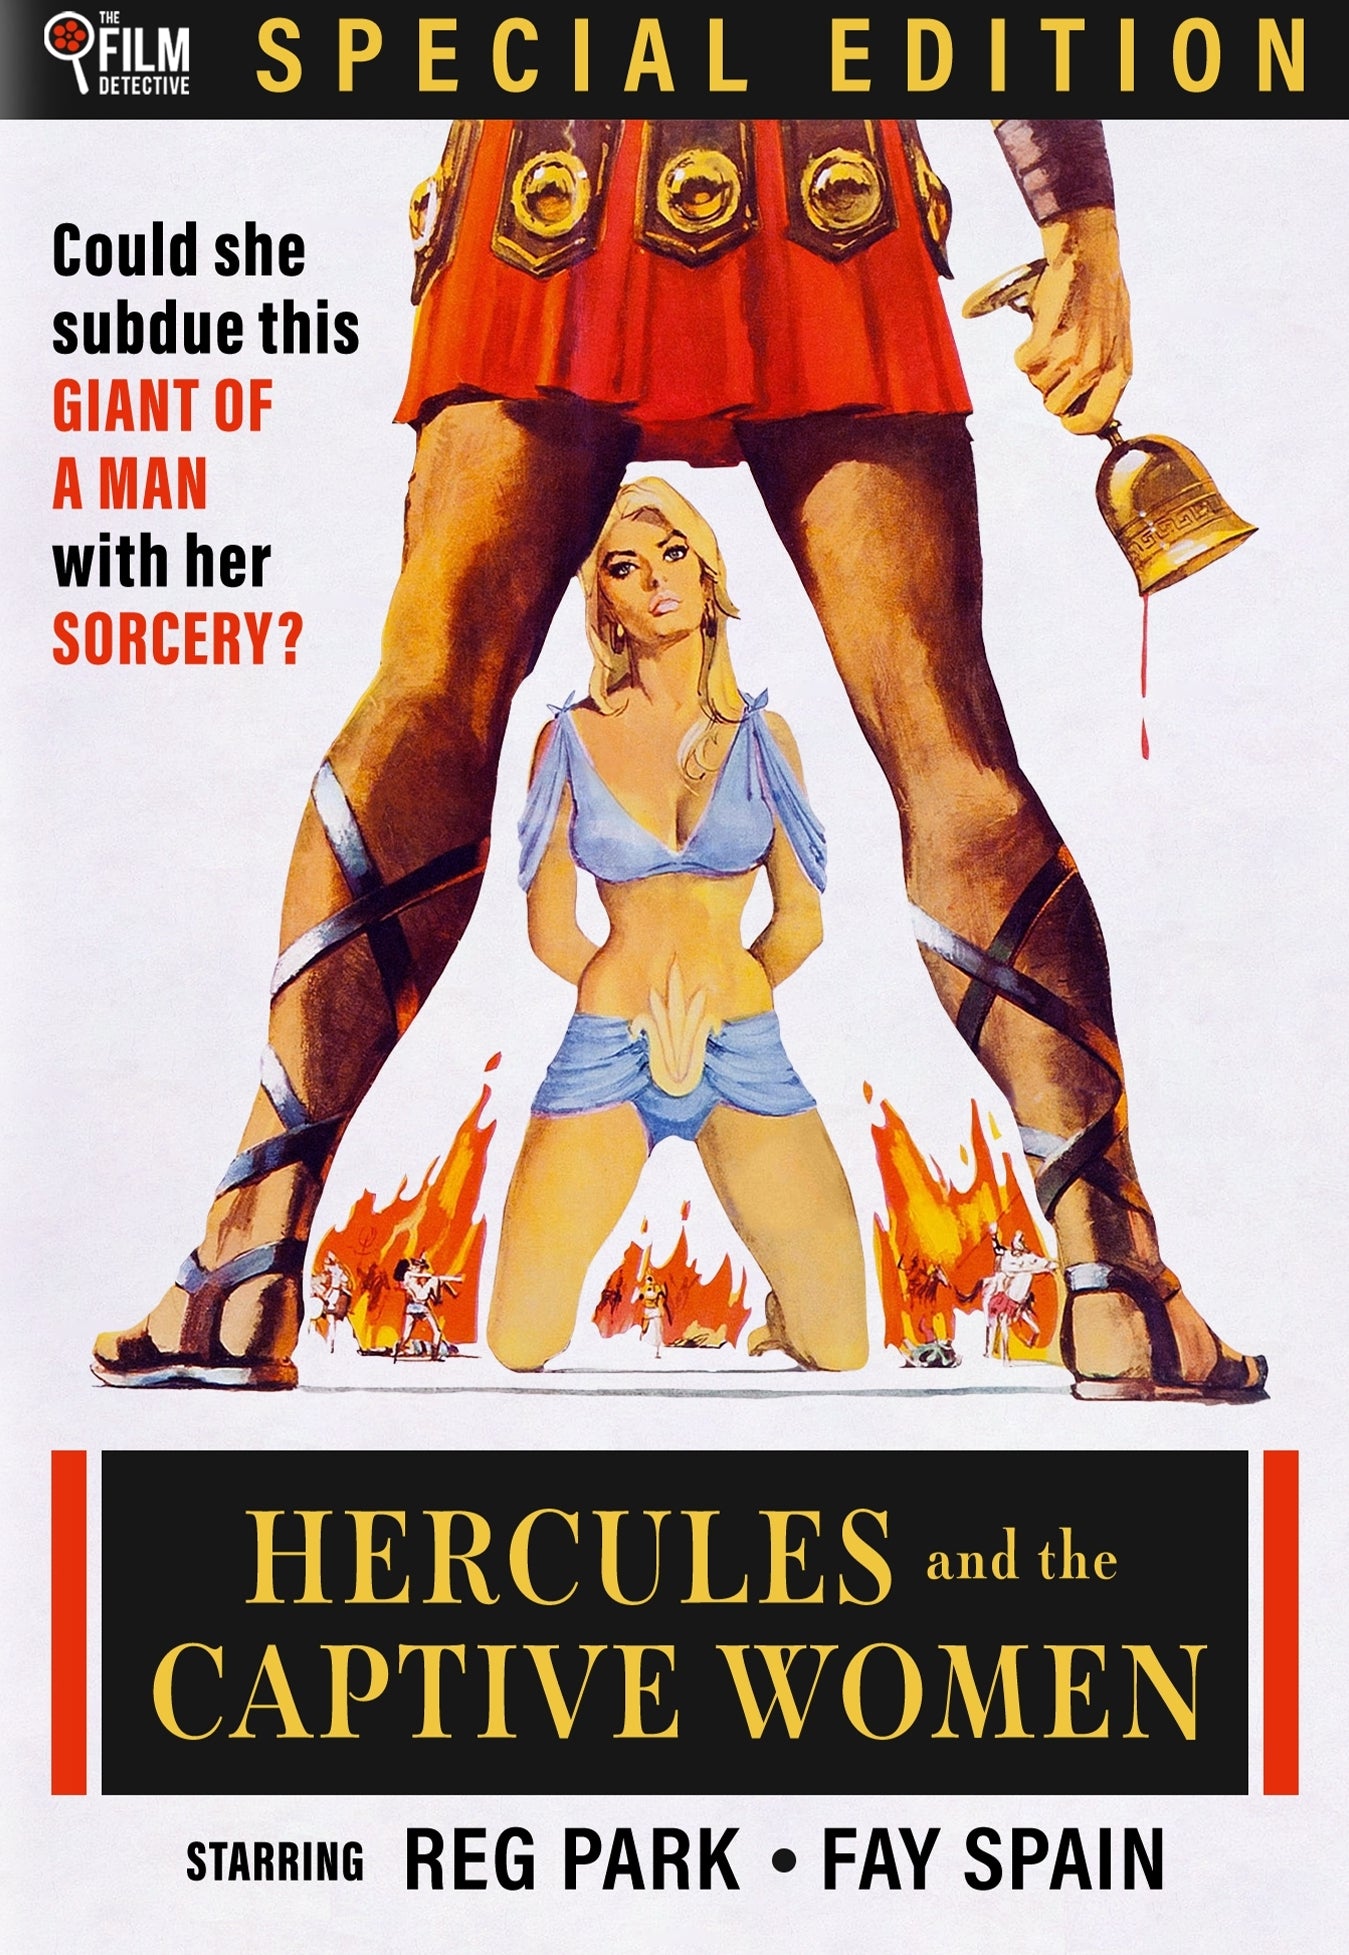 Hercules and the Captive Women cover art